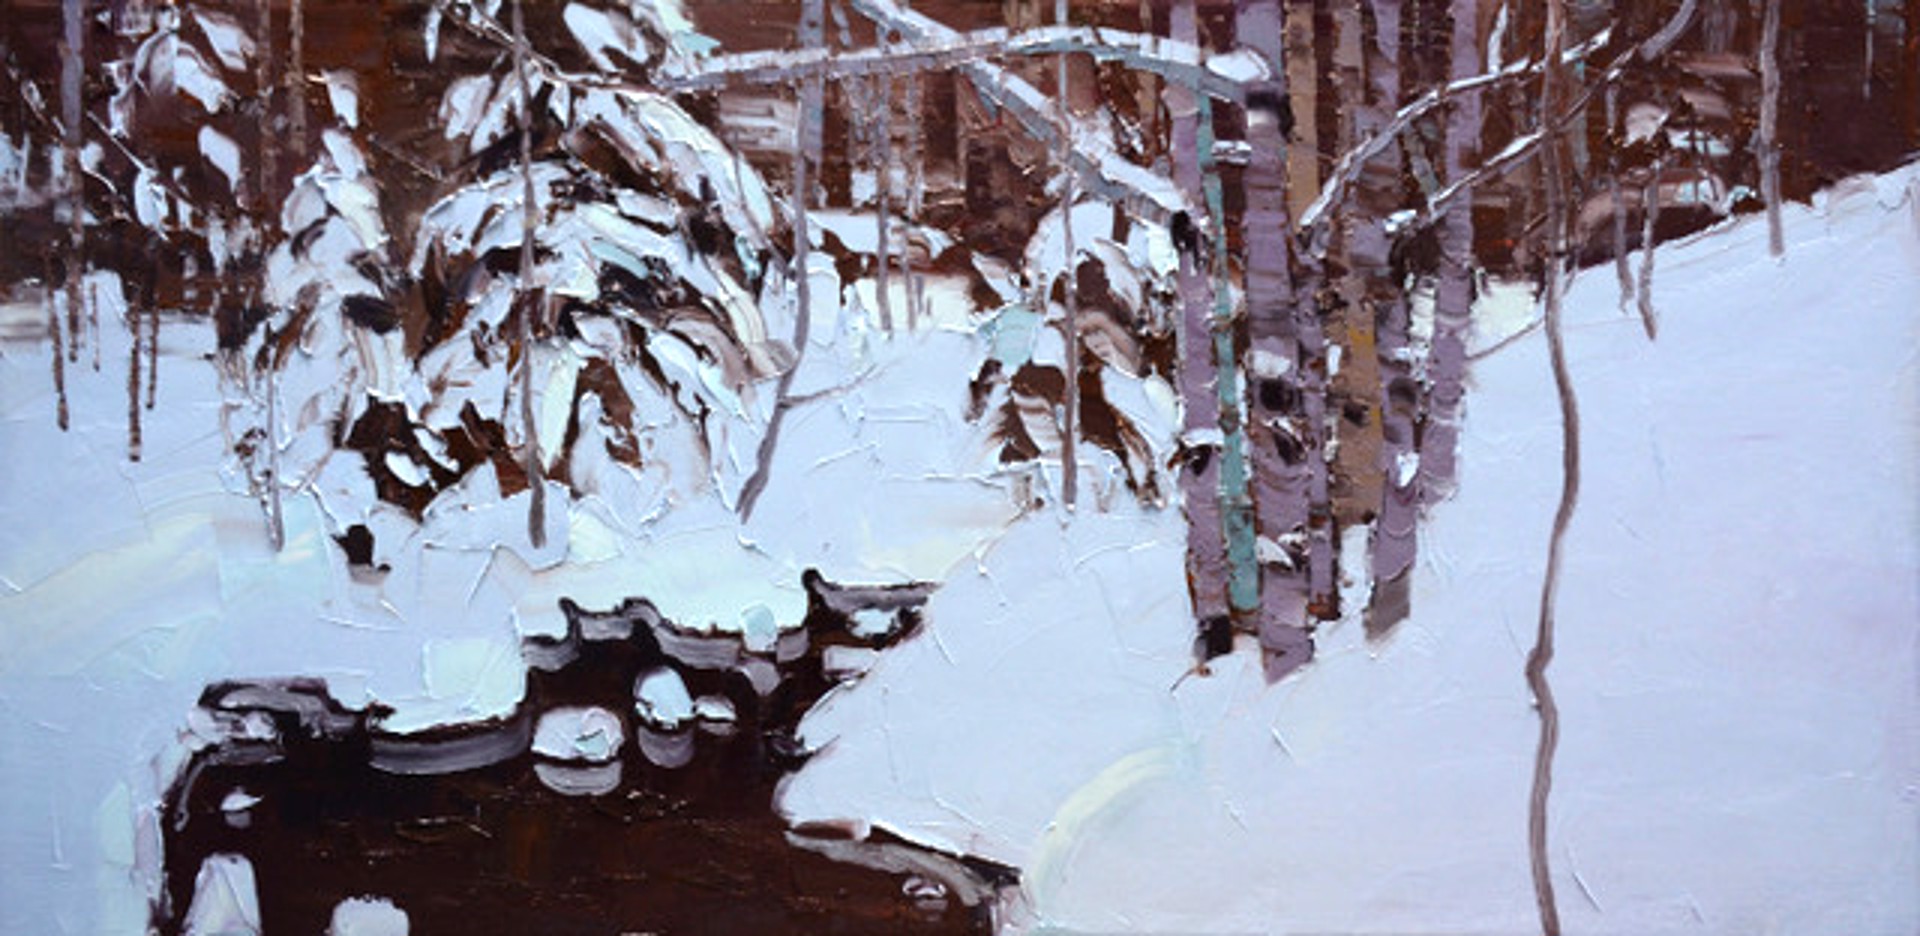 A Palette Knife Oil Painting Of A Winter Forest With A Creek Running through It By Silas Thompson At Gallery Wild